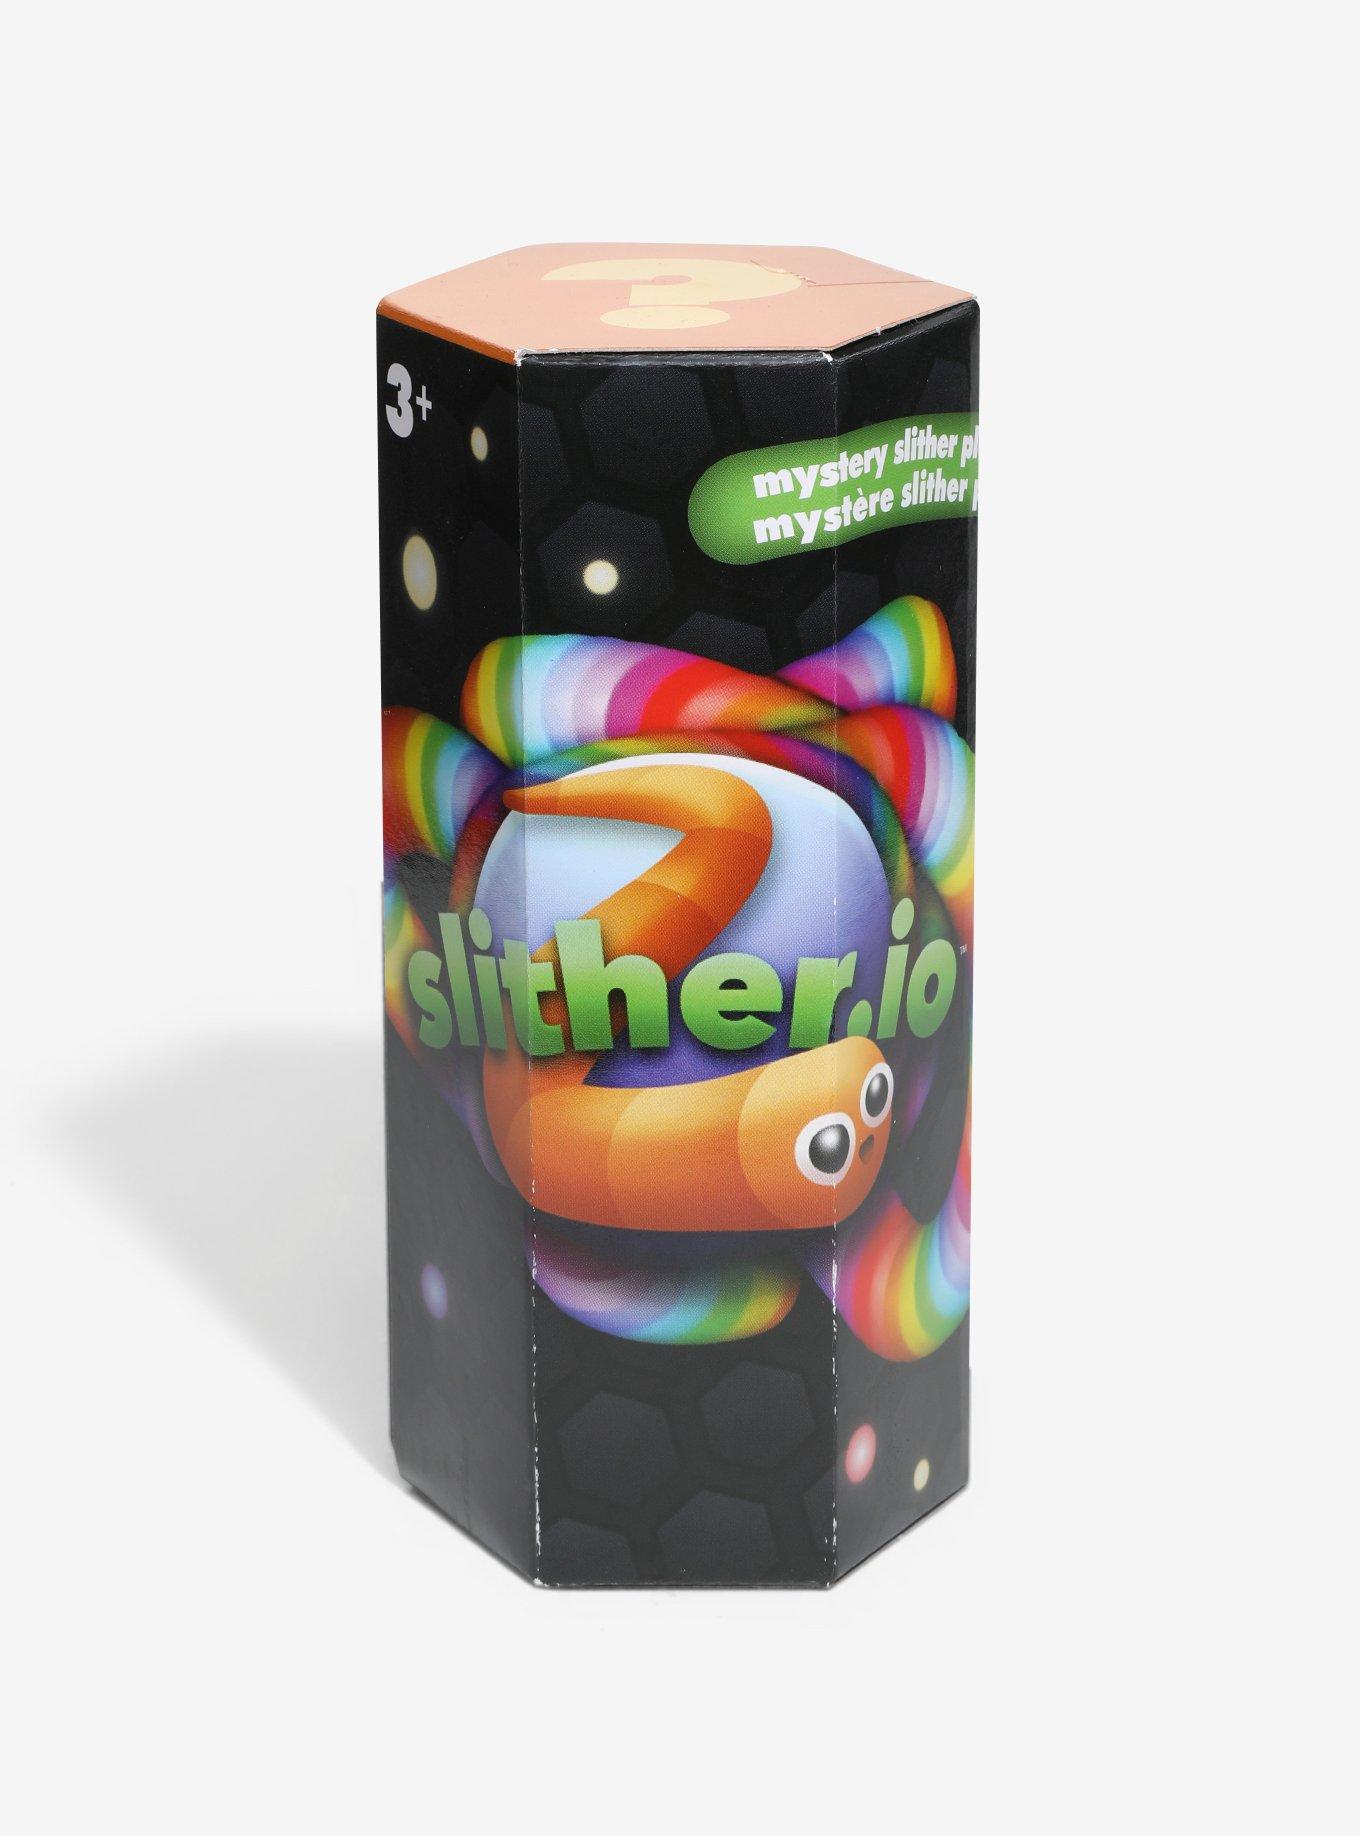 Slither.io Series 1 Mystery Slither Blind Box Plush Key Chain